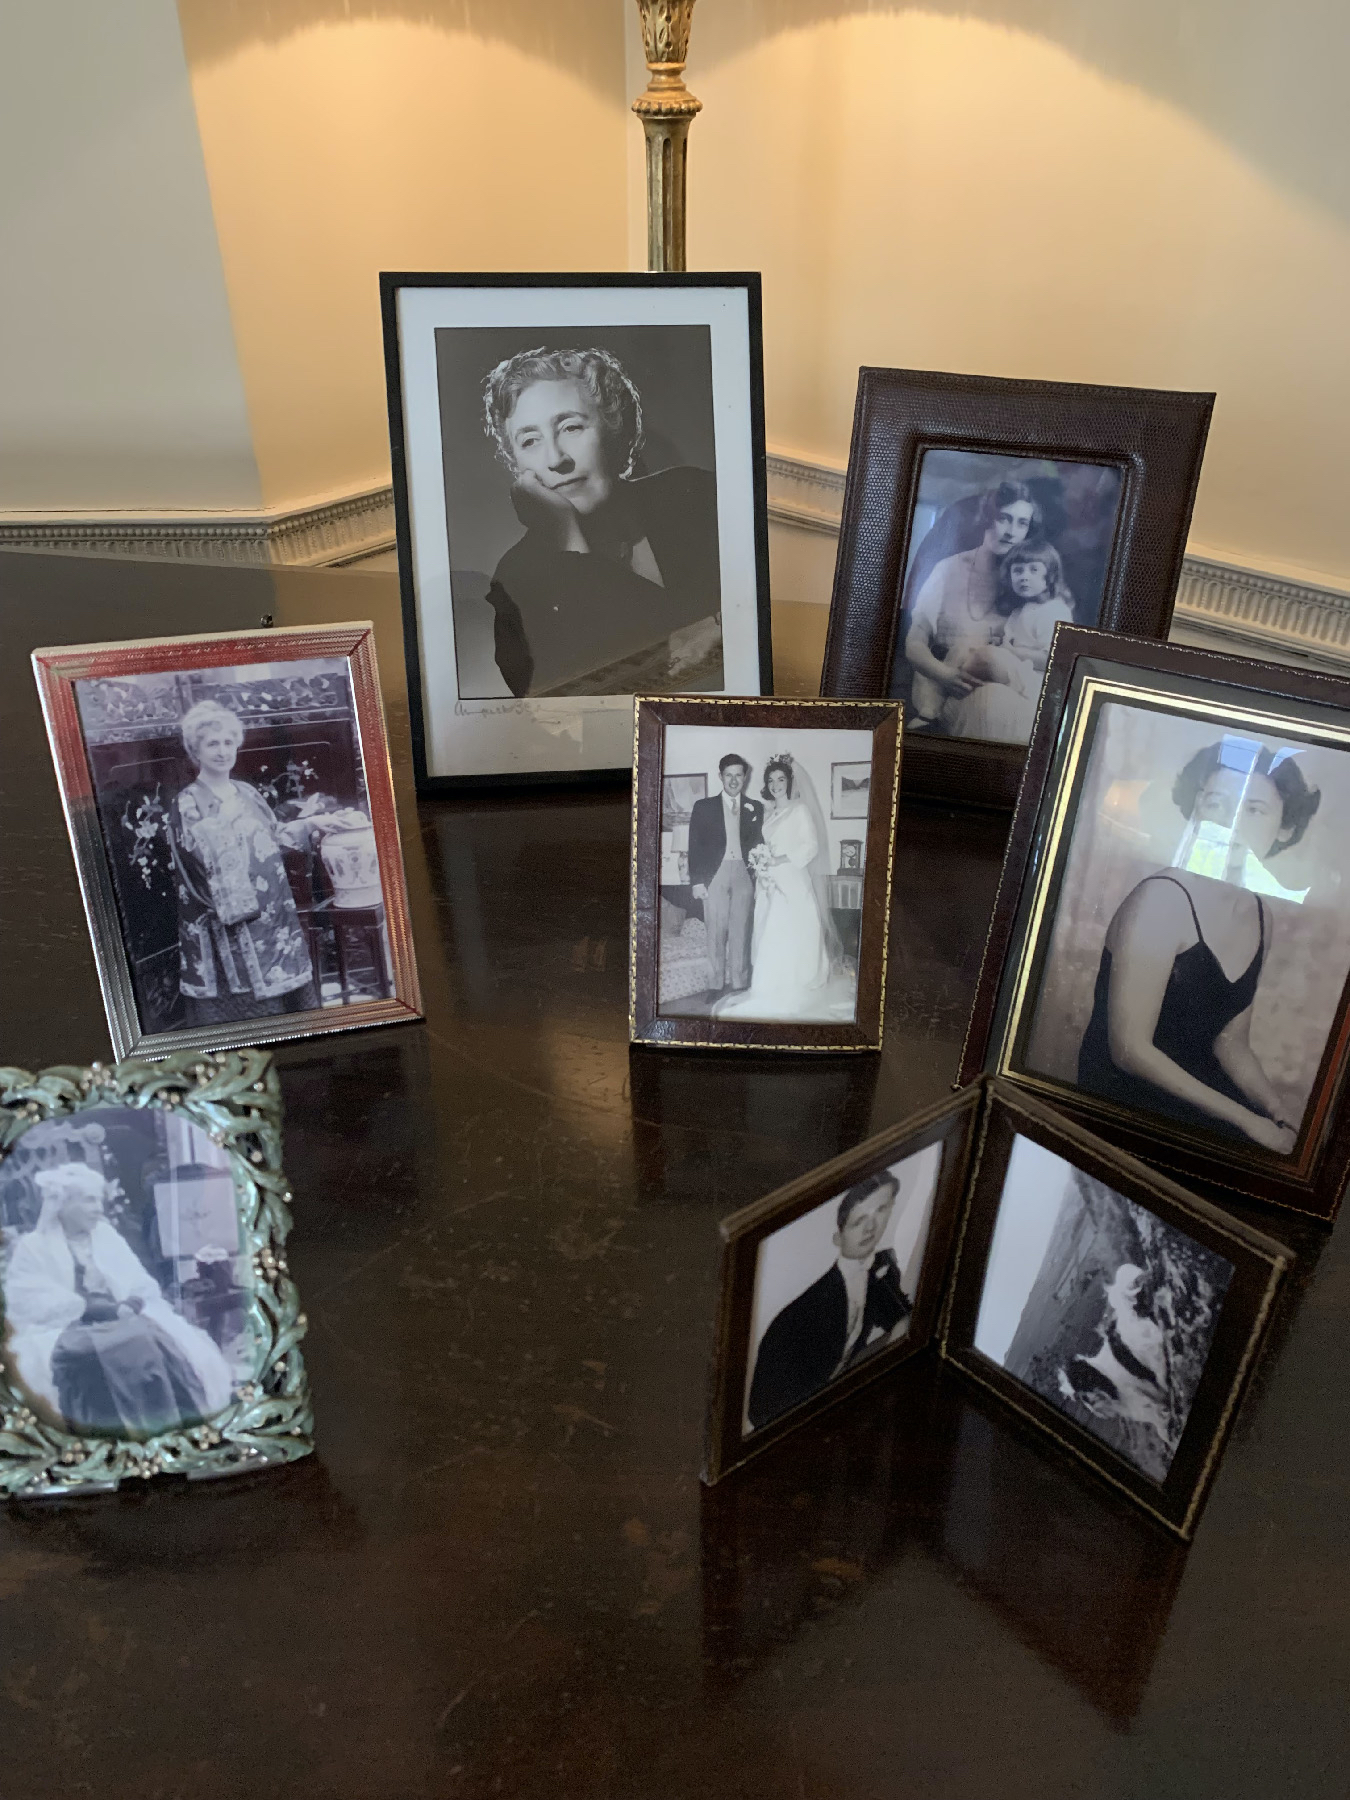 Family heirlooms, with a portrait of Agatha Christie in the background, adorn Greenway, the author's home on England's south coast.  (Photo courtesy of Carl H. Larsen)